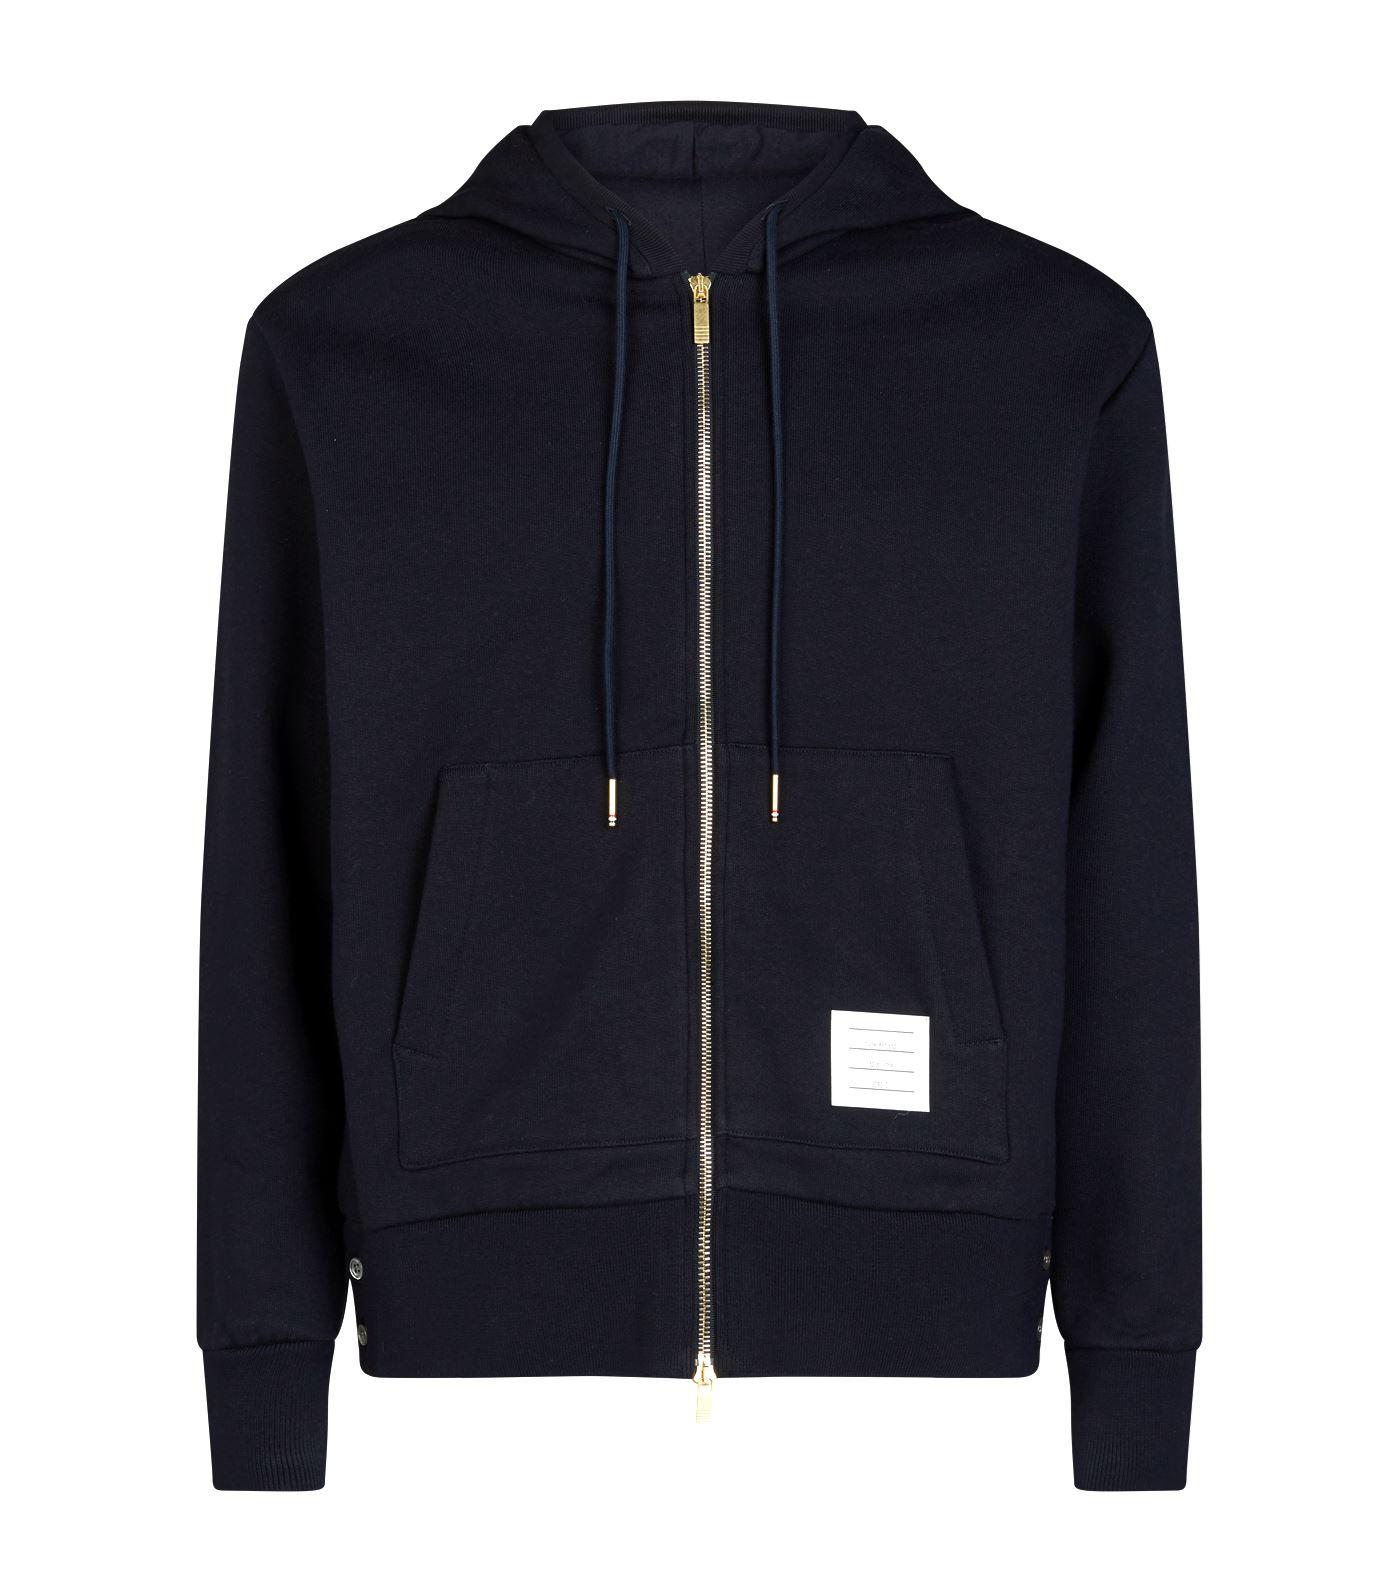 Thom Browne Tricolour Zip-up Hoodie in Blue for Men - Lyst